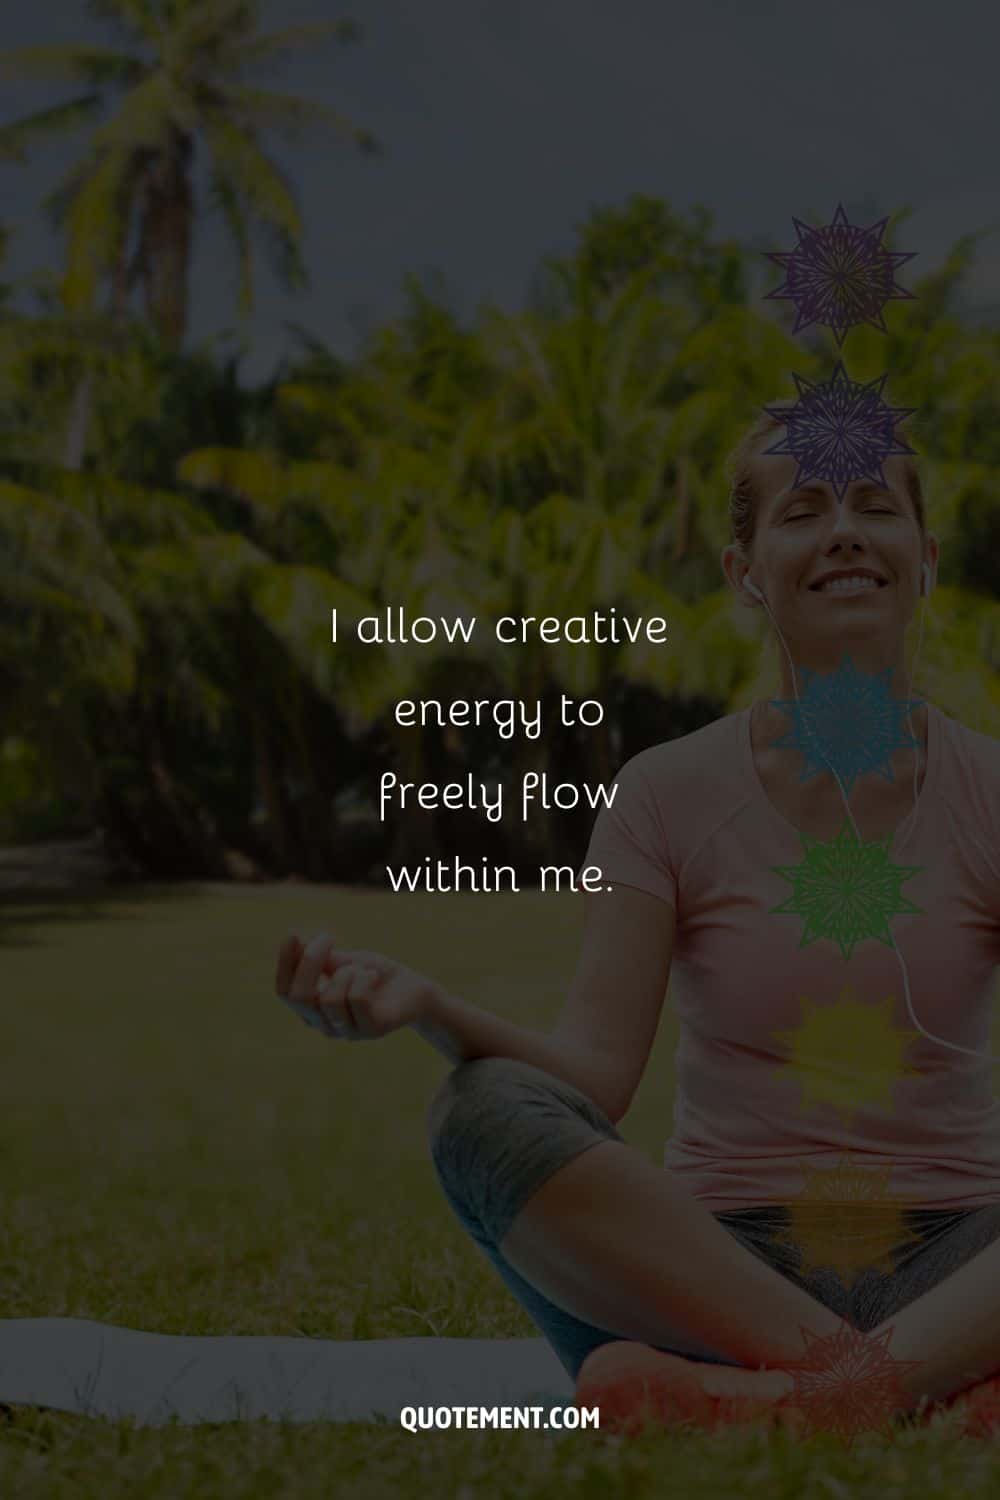 woman meditating in nature representing a creativity affirmation
